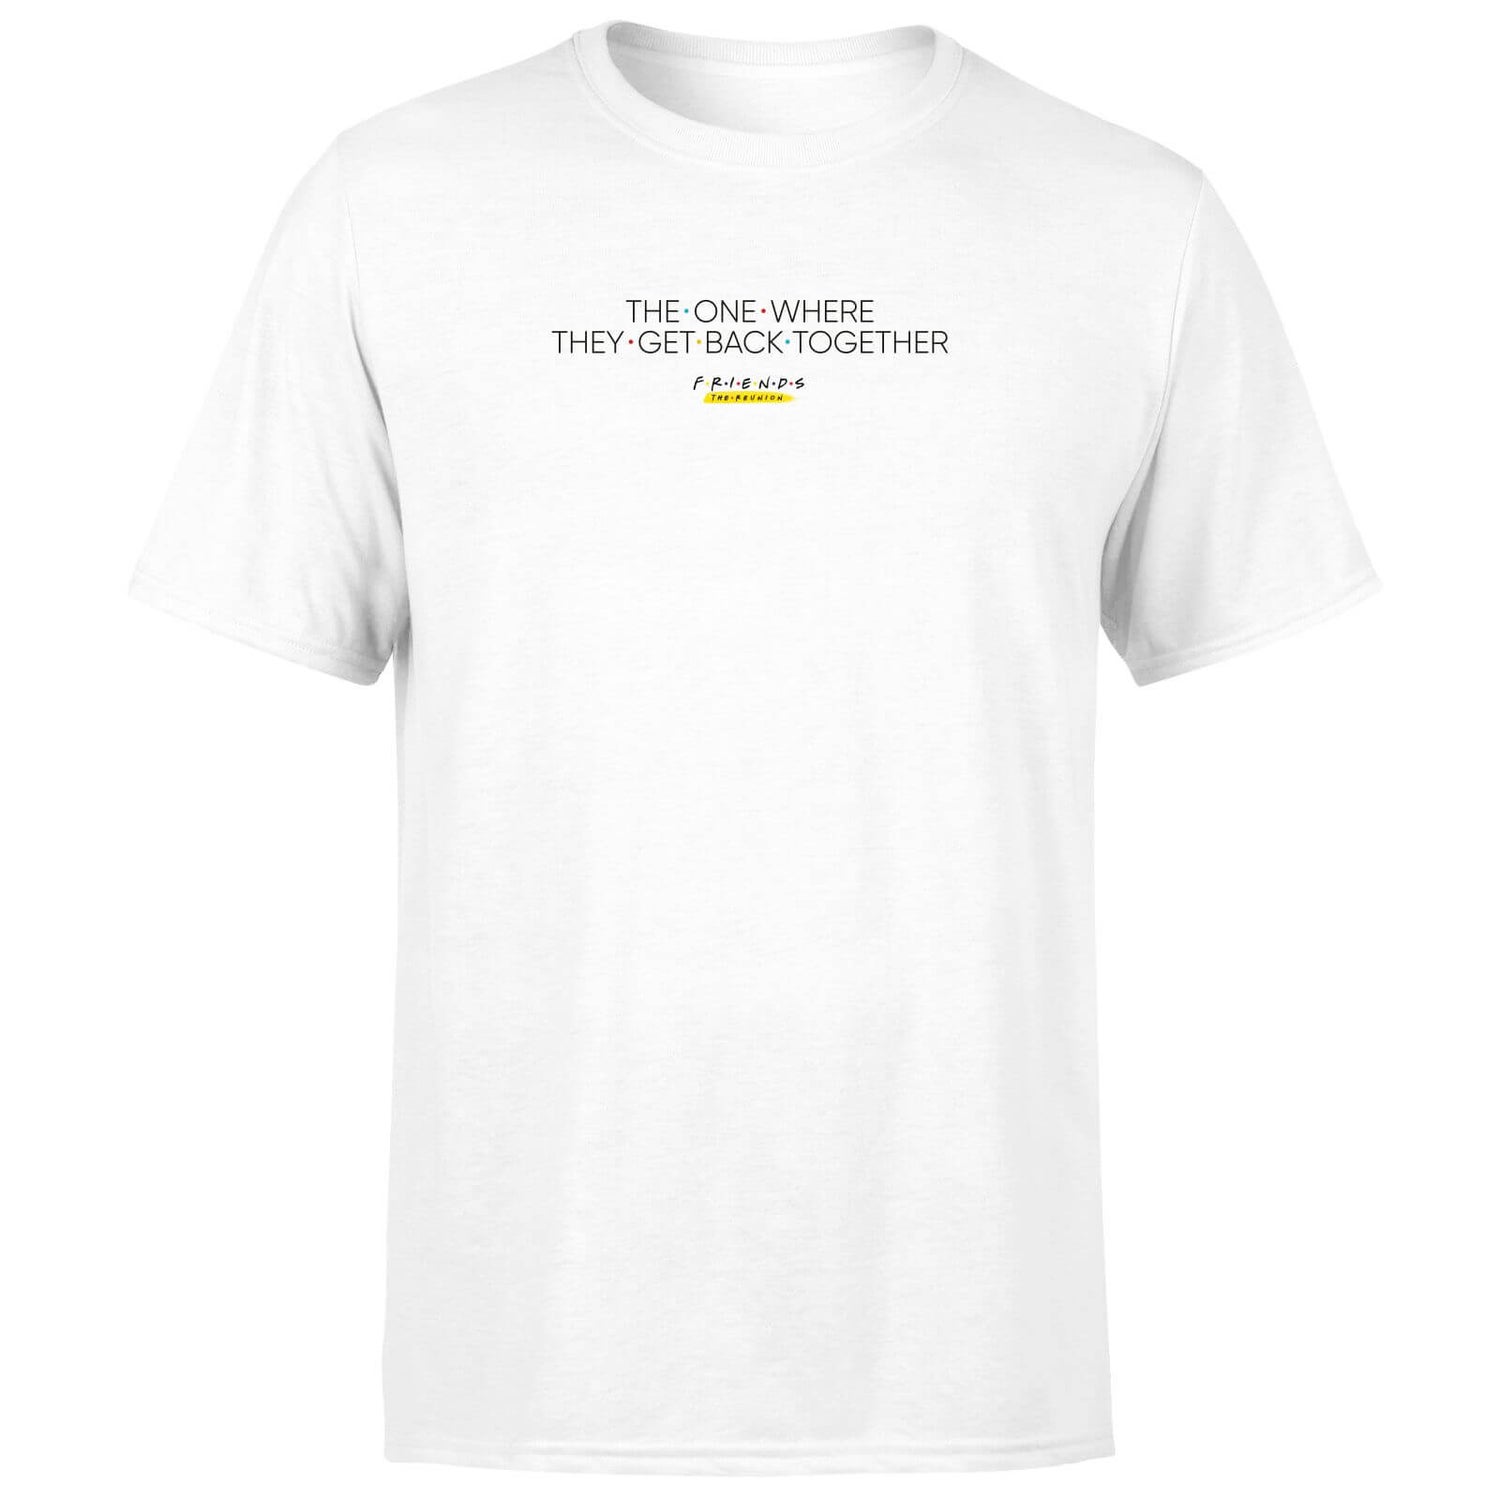 Camiseta unisex Friends The One Where They Get Back Together - Blanco